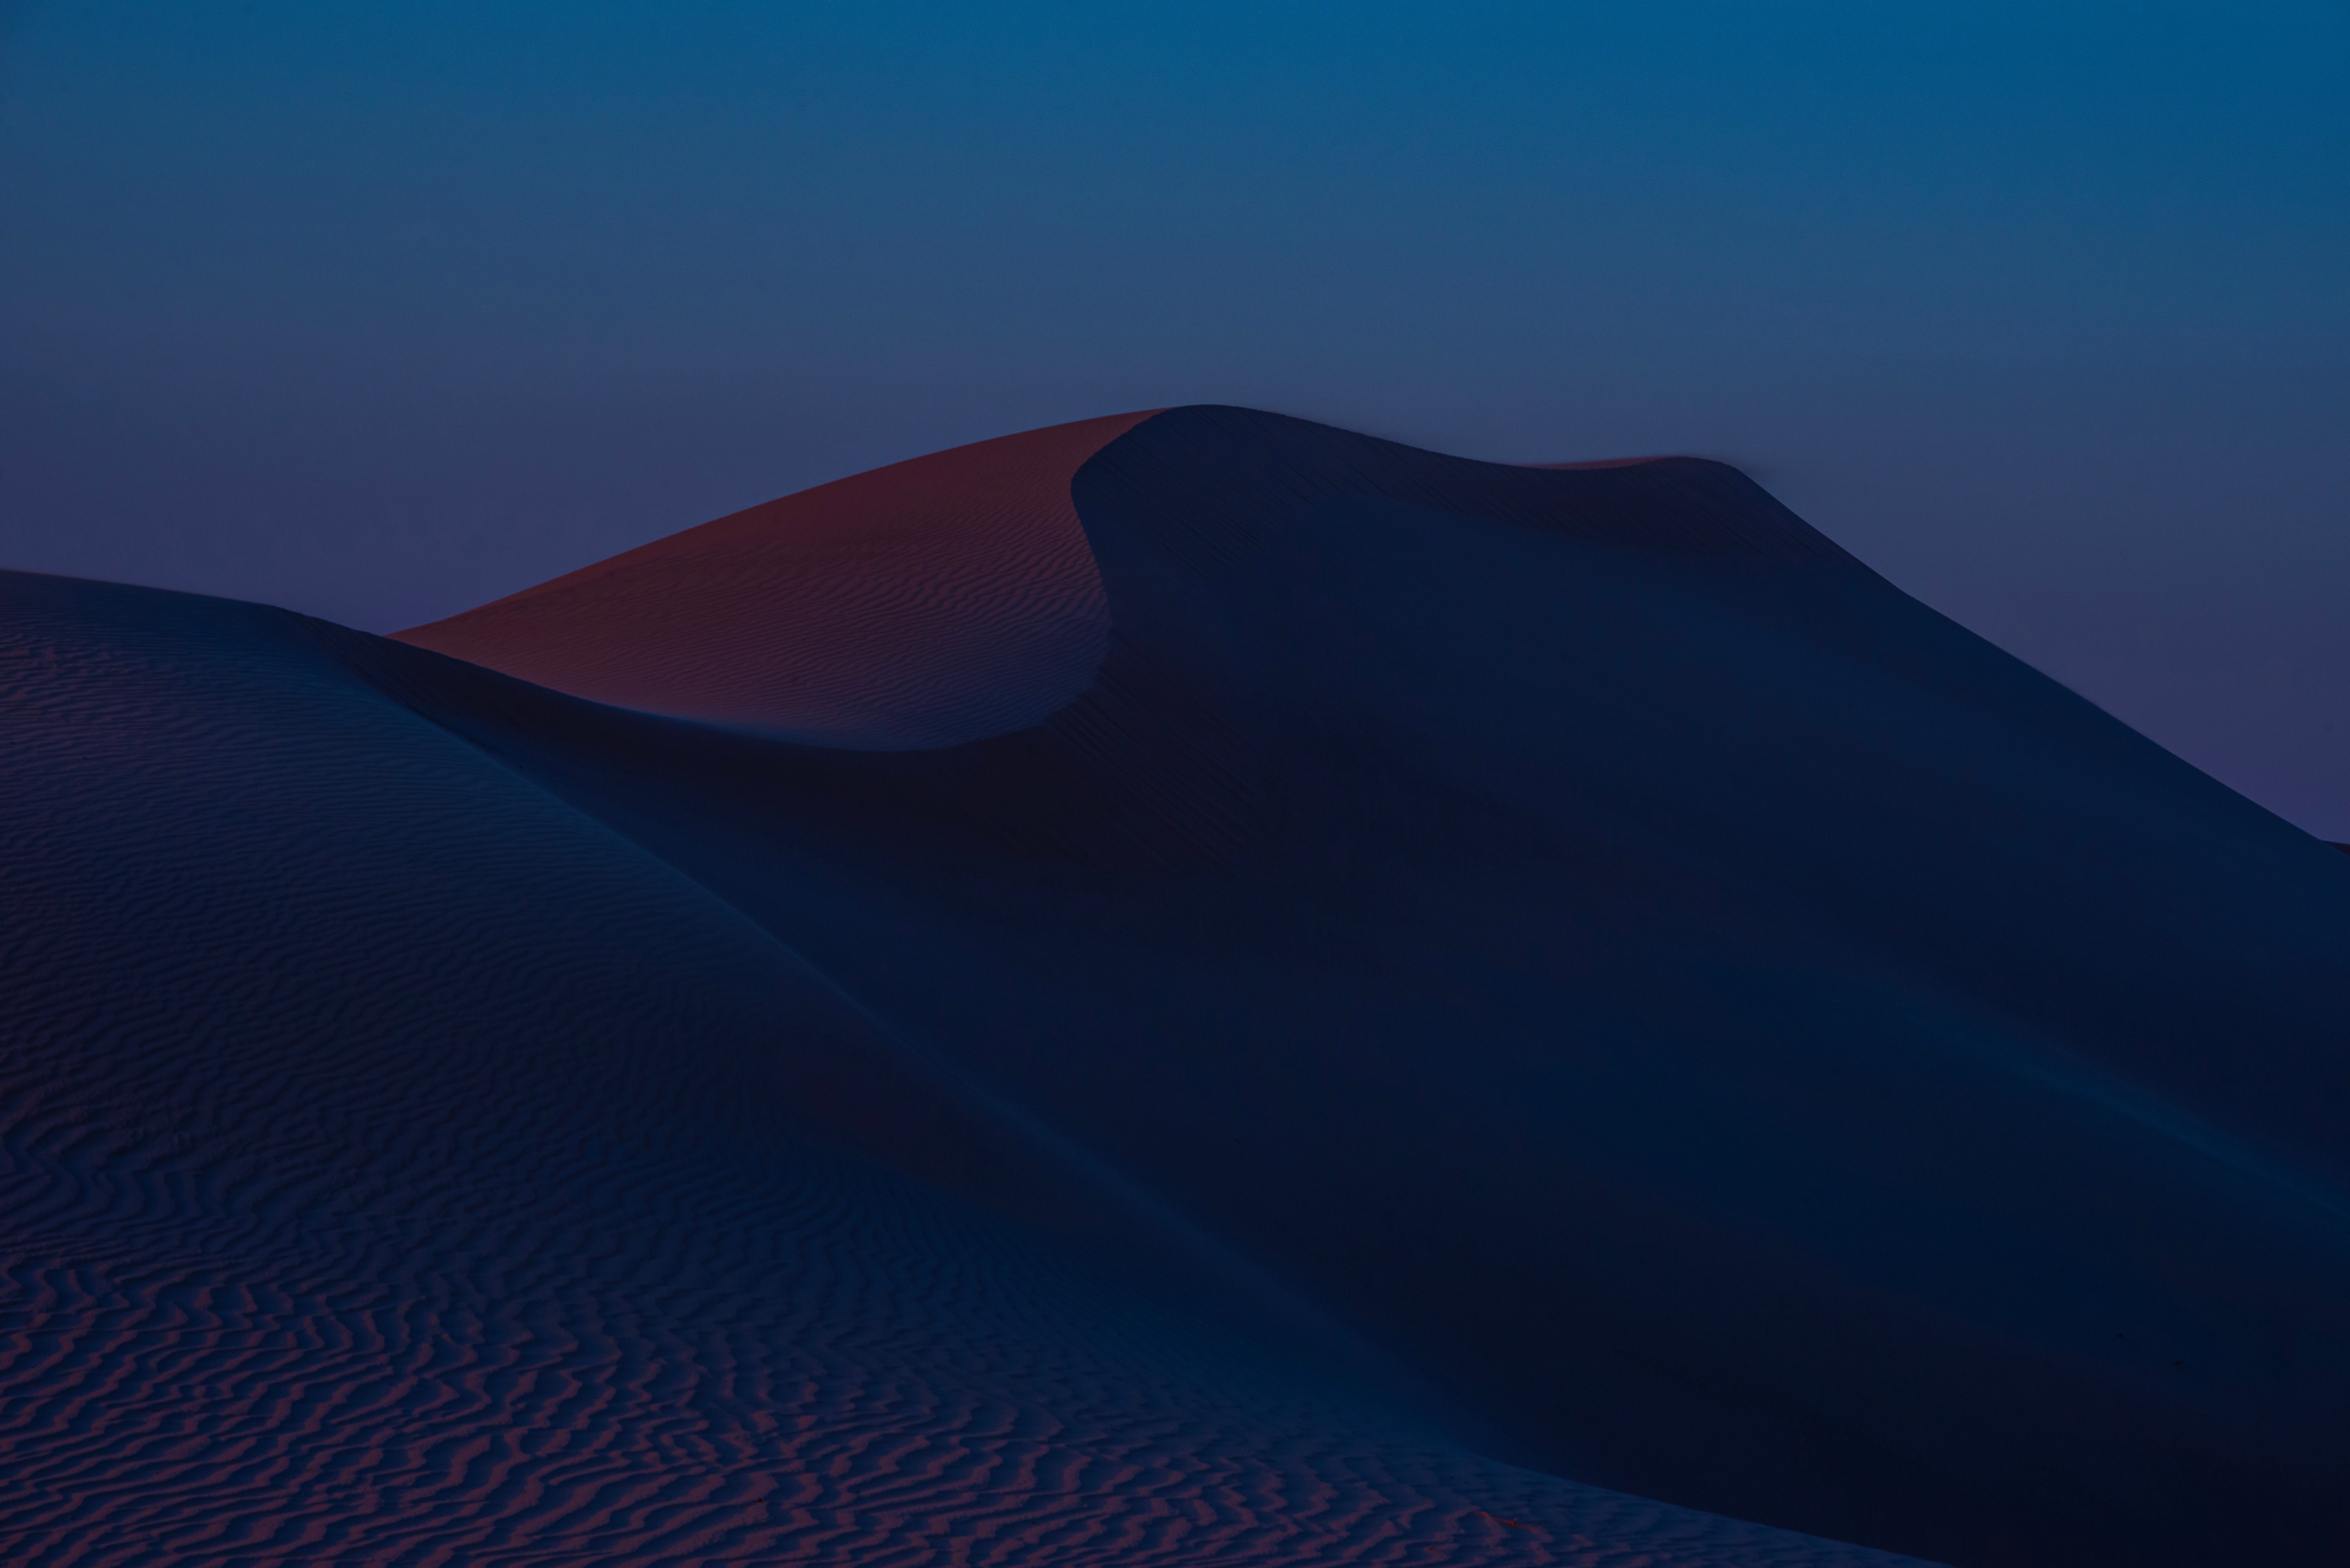 65922 download wallpaper desert, nature, twilight, sand, dusk, hill, dunes, links screensavers and pictures for free